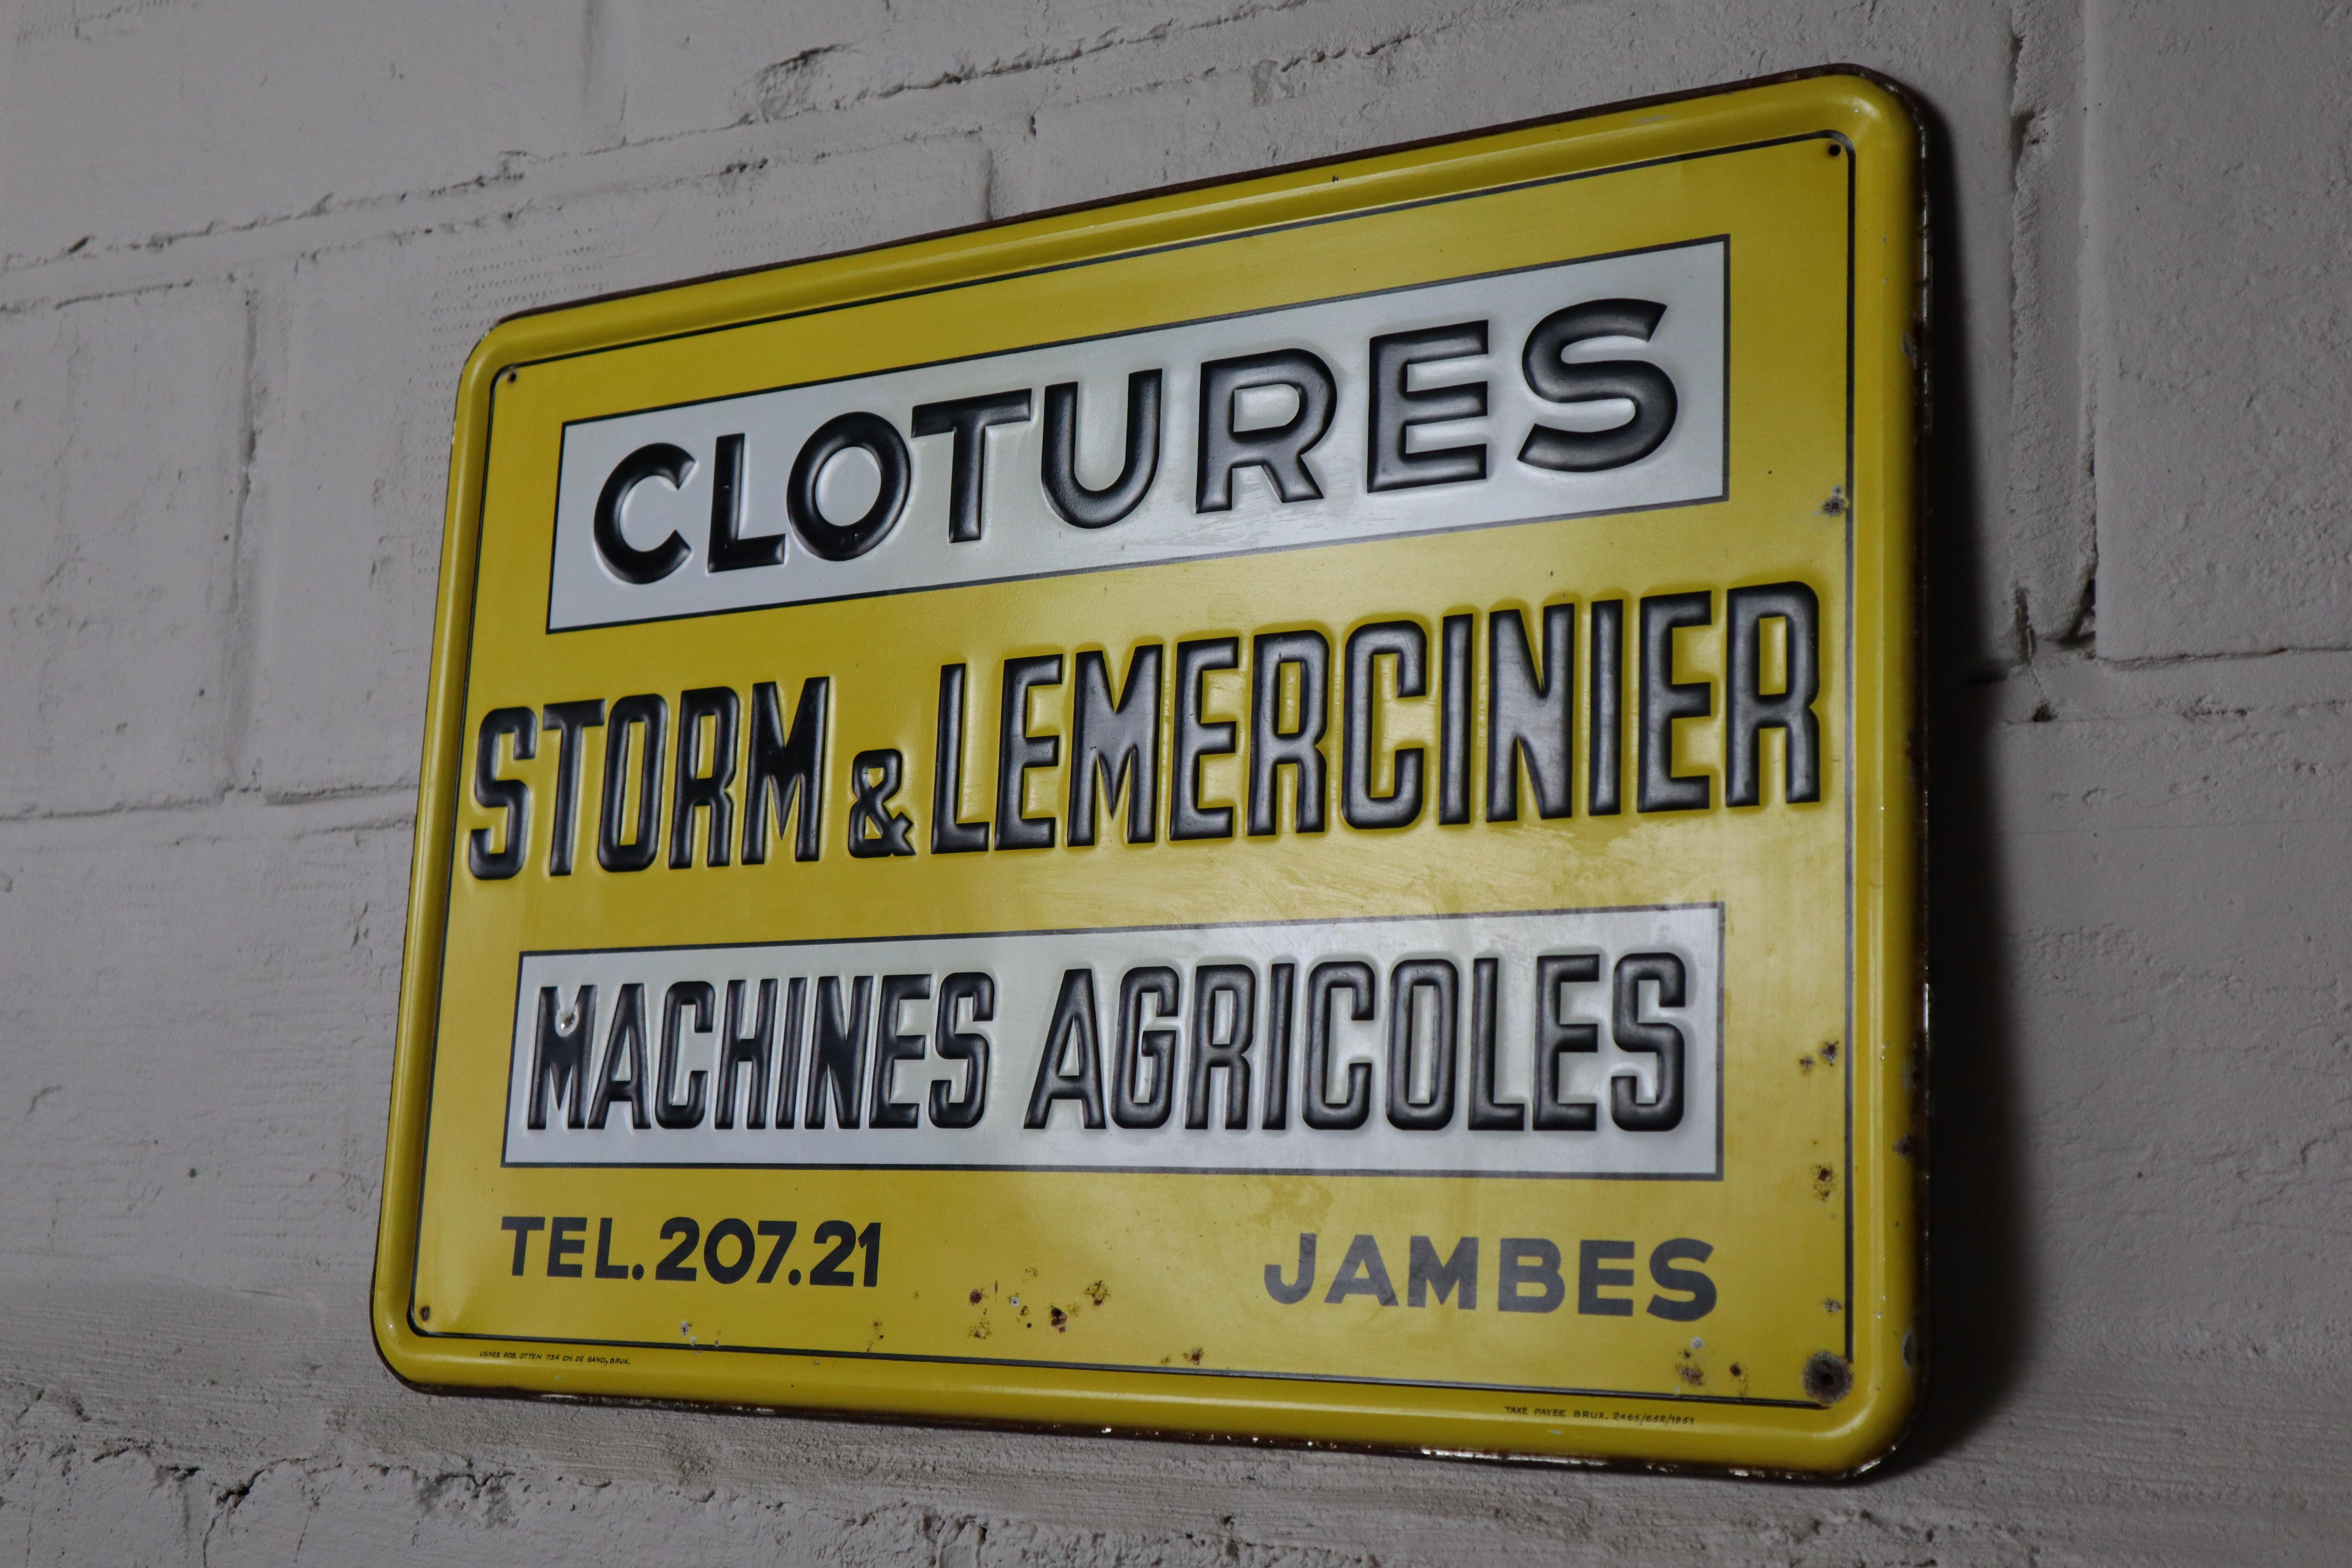 Tin advertising sign for 'Storm & Lemercinier', a company from the Belgian Ardennes that specialized in gates and agricultural machinery.

The sign was manufactured in 1951 by Rob Otten (Brussels), a company well known among collectors of publicity